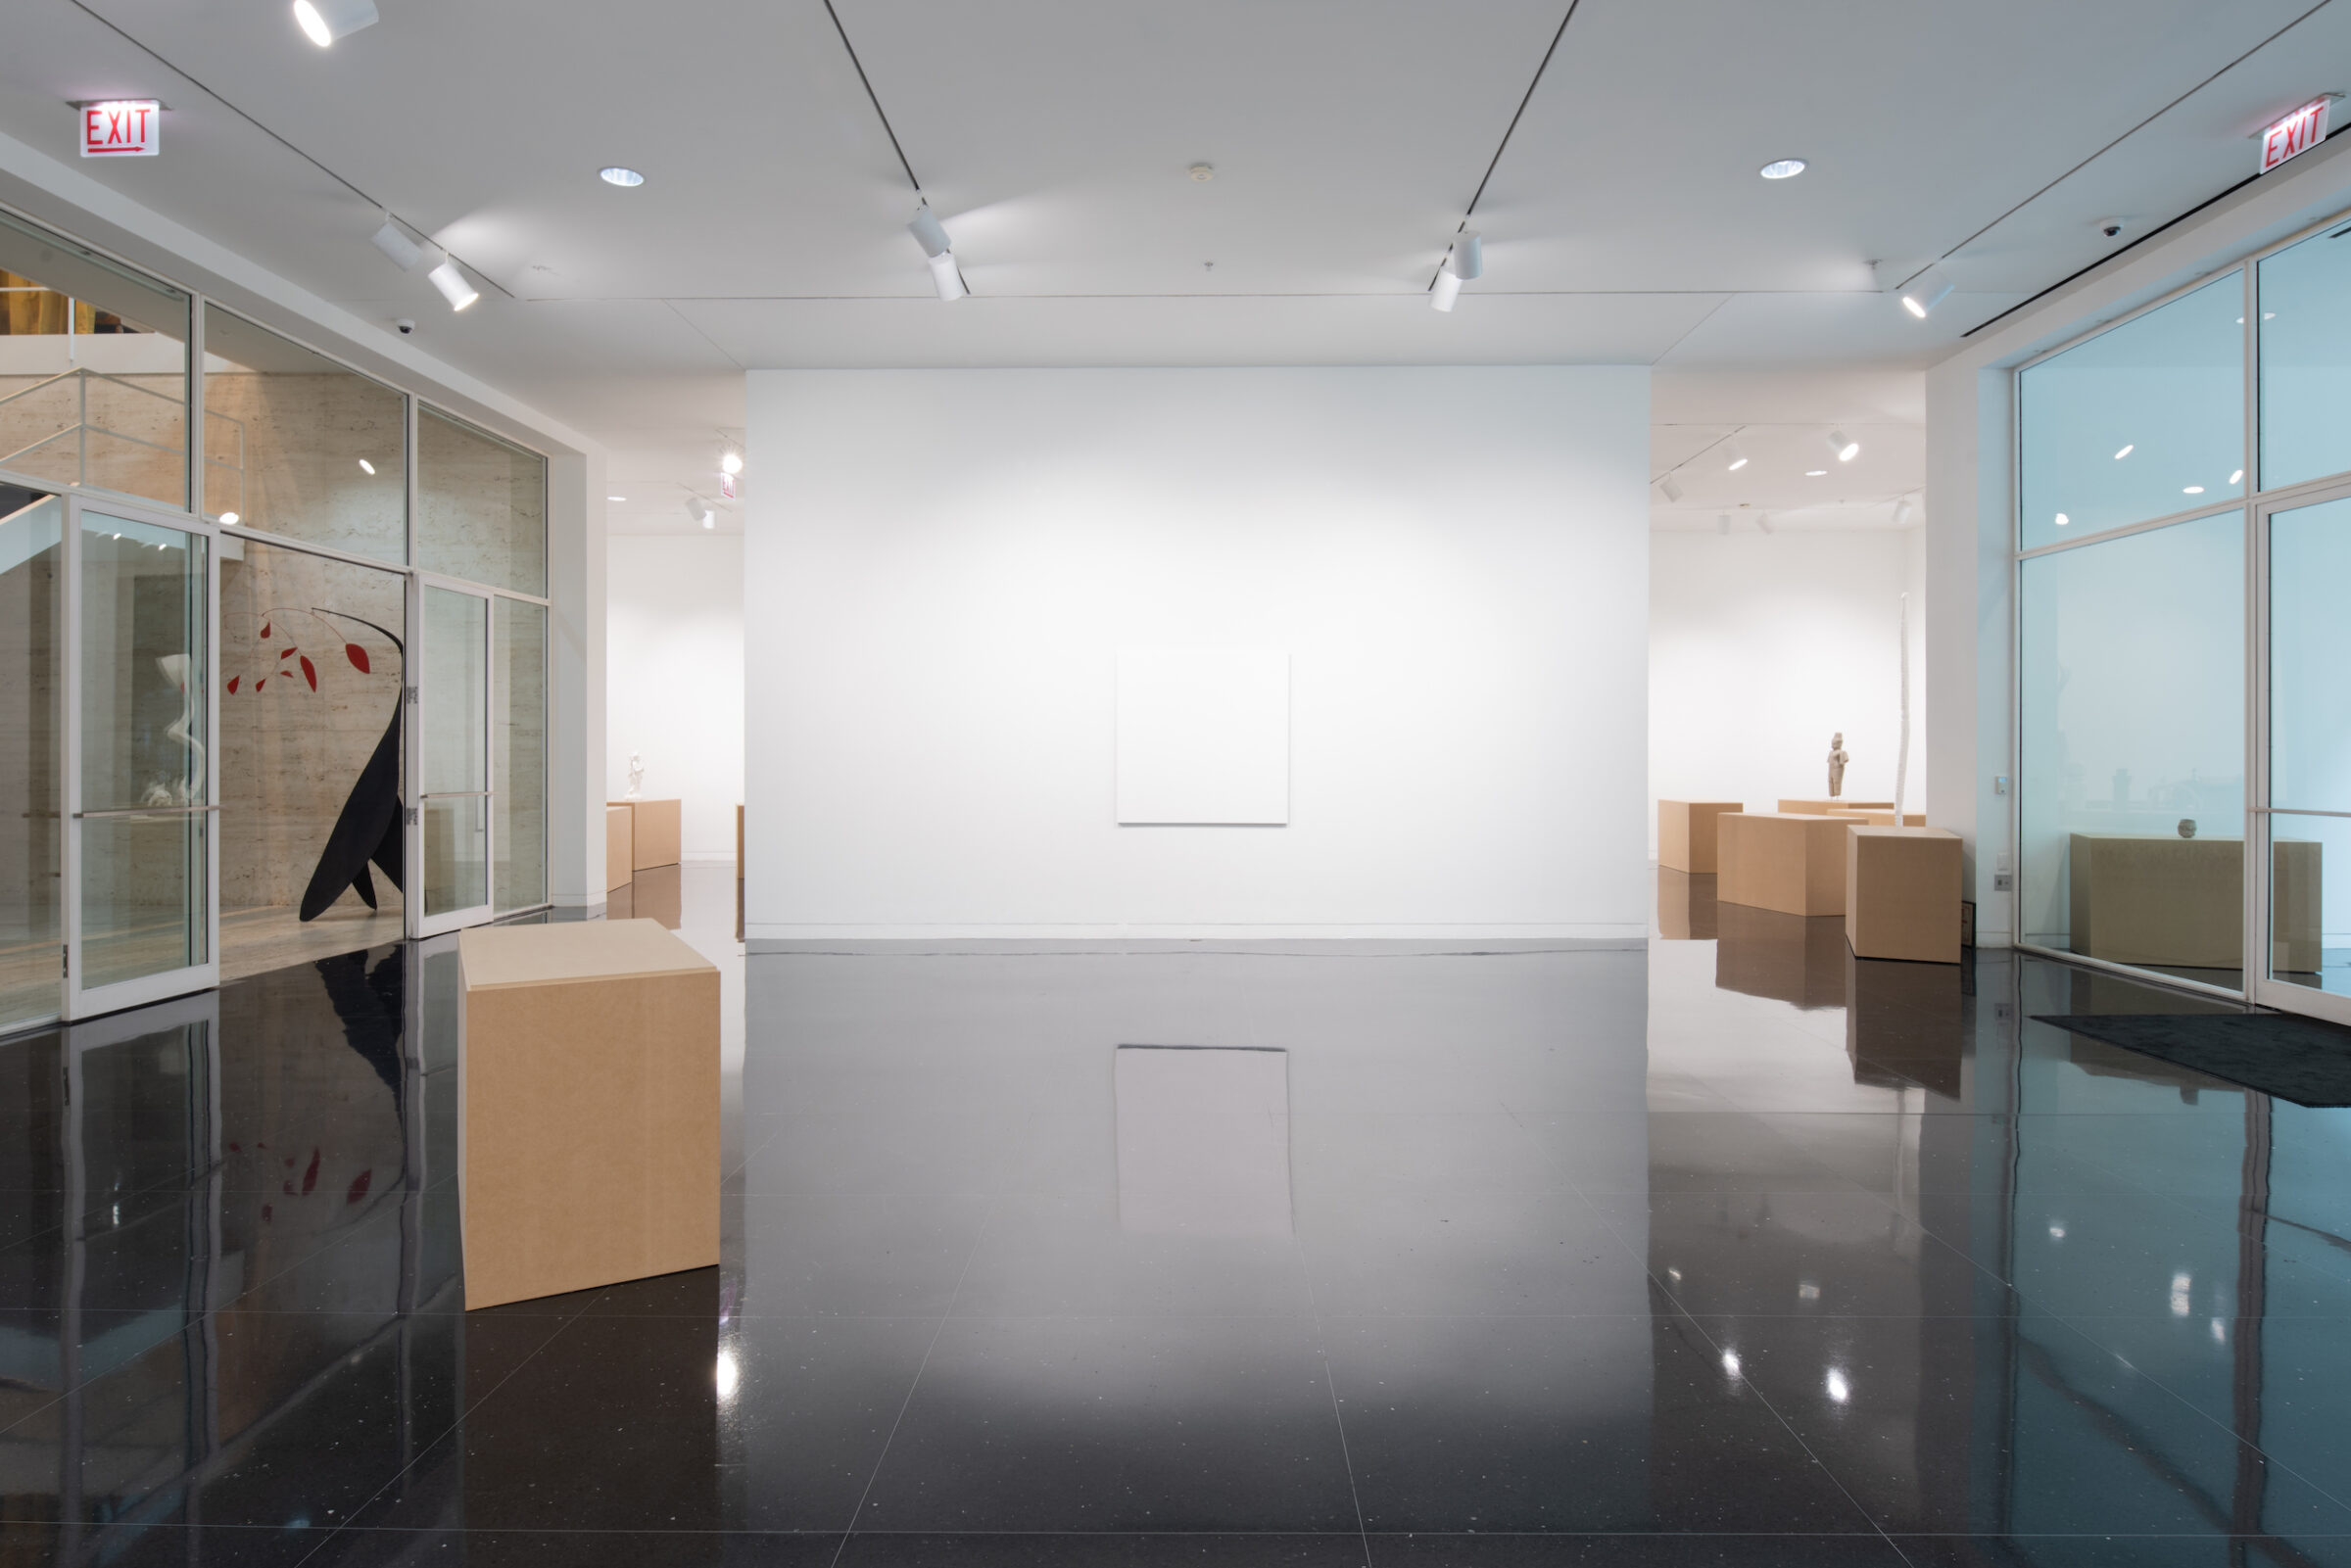 A white walled gallery containing several pedestals resembling cardboard boxes. One on freestanding wall, a large square canvas the identical color of the wall hangs centered. In a far gallery, a sculpture of a standing figure is visible.